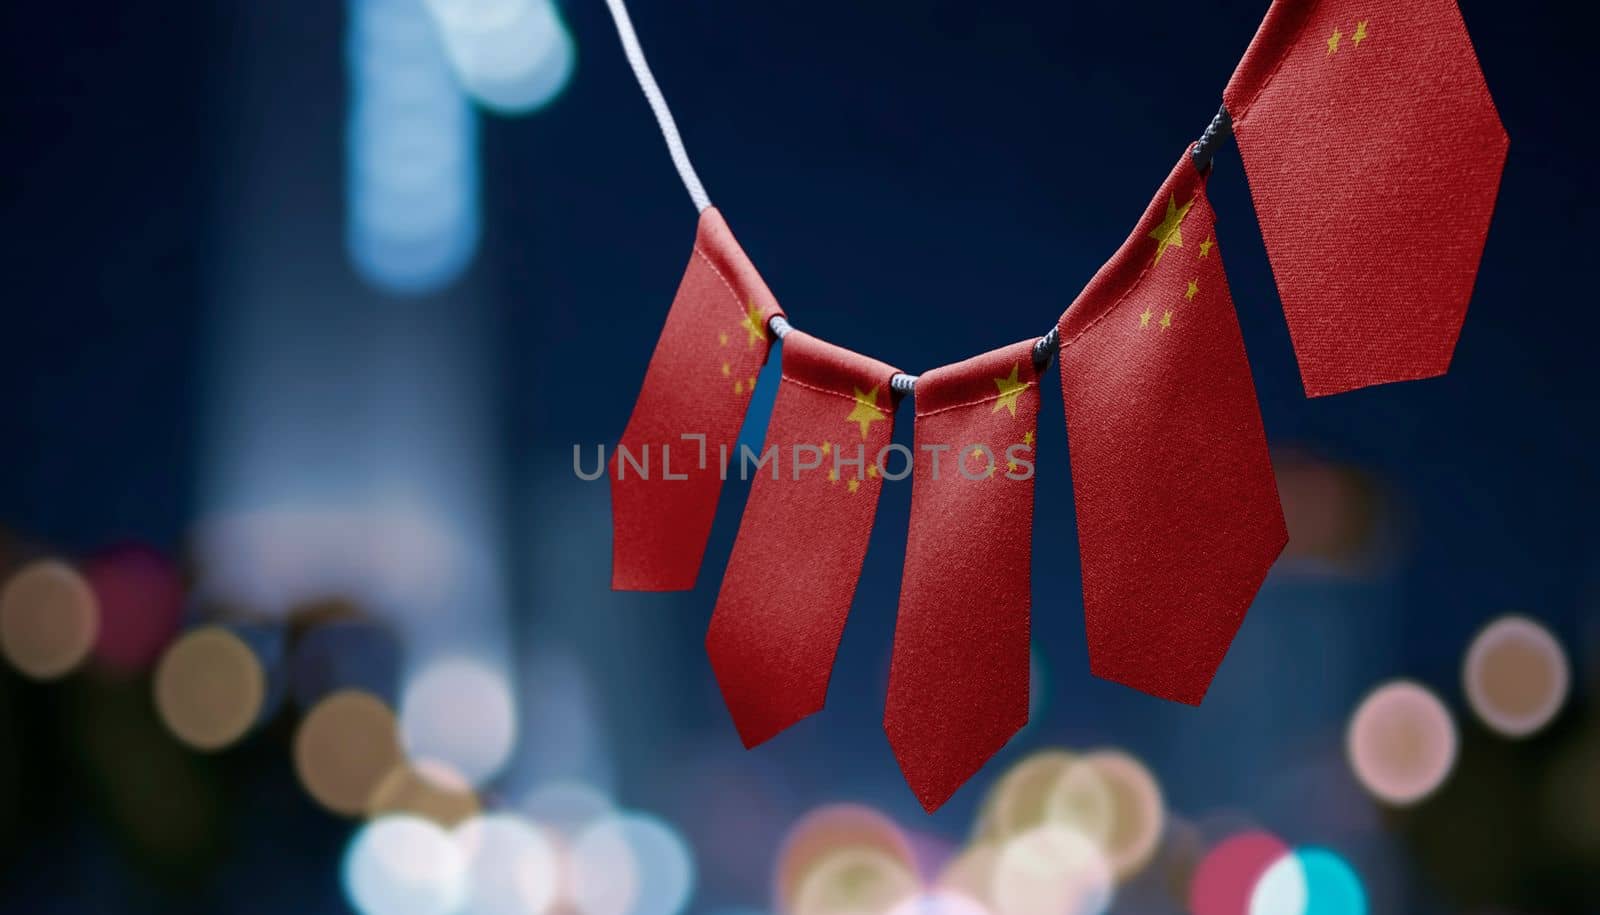 A garland of China national flags on an abstract blurred background.